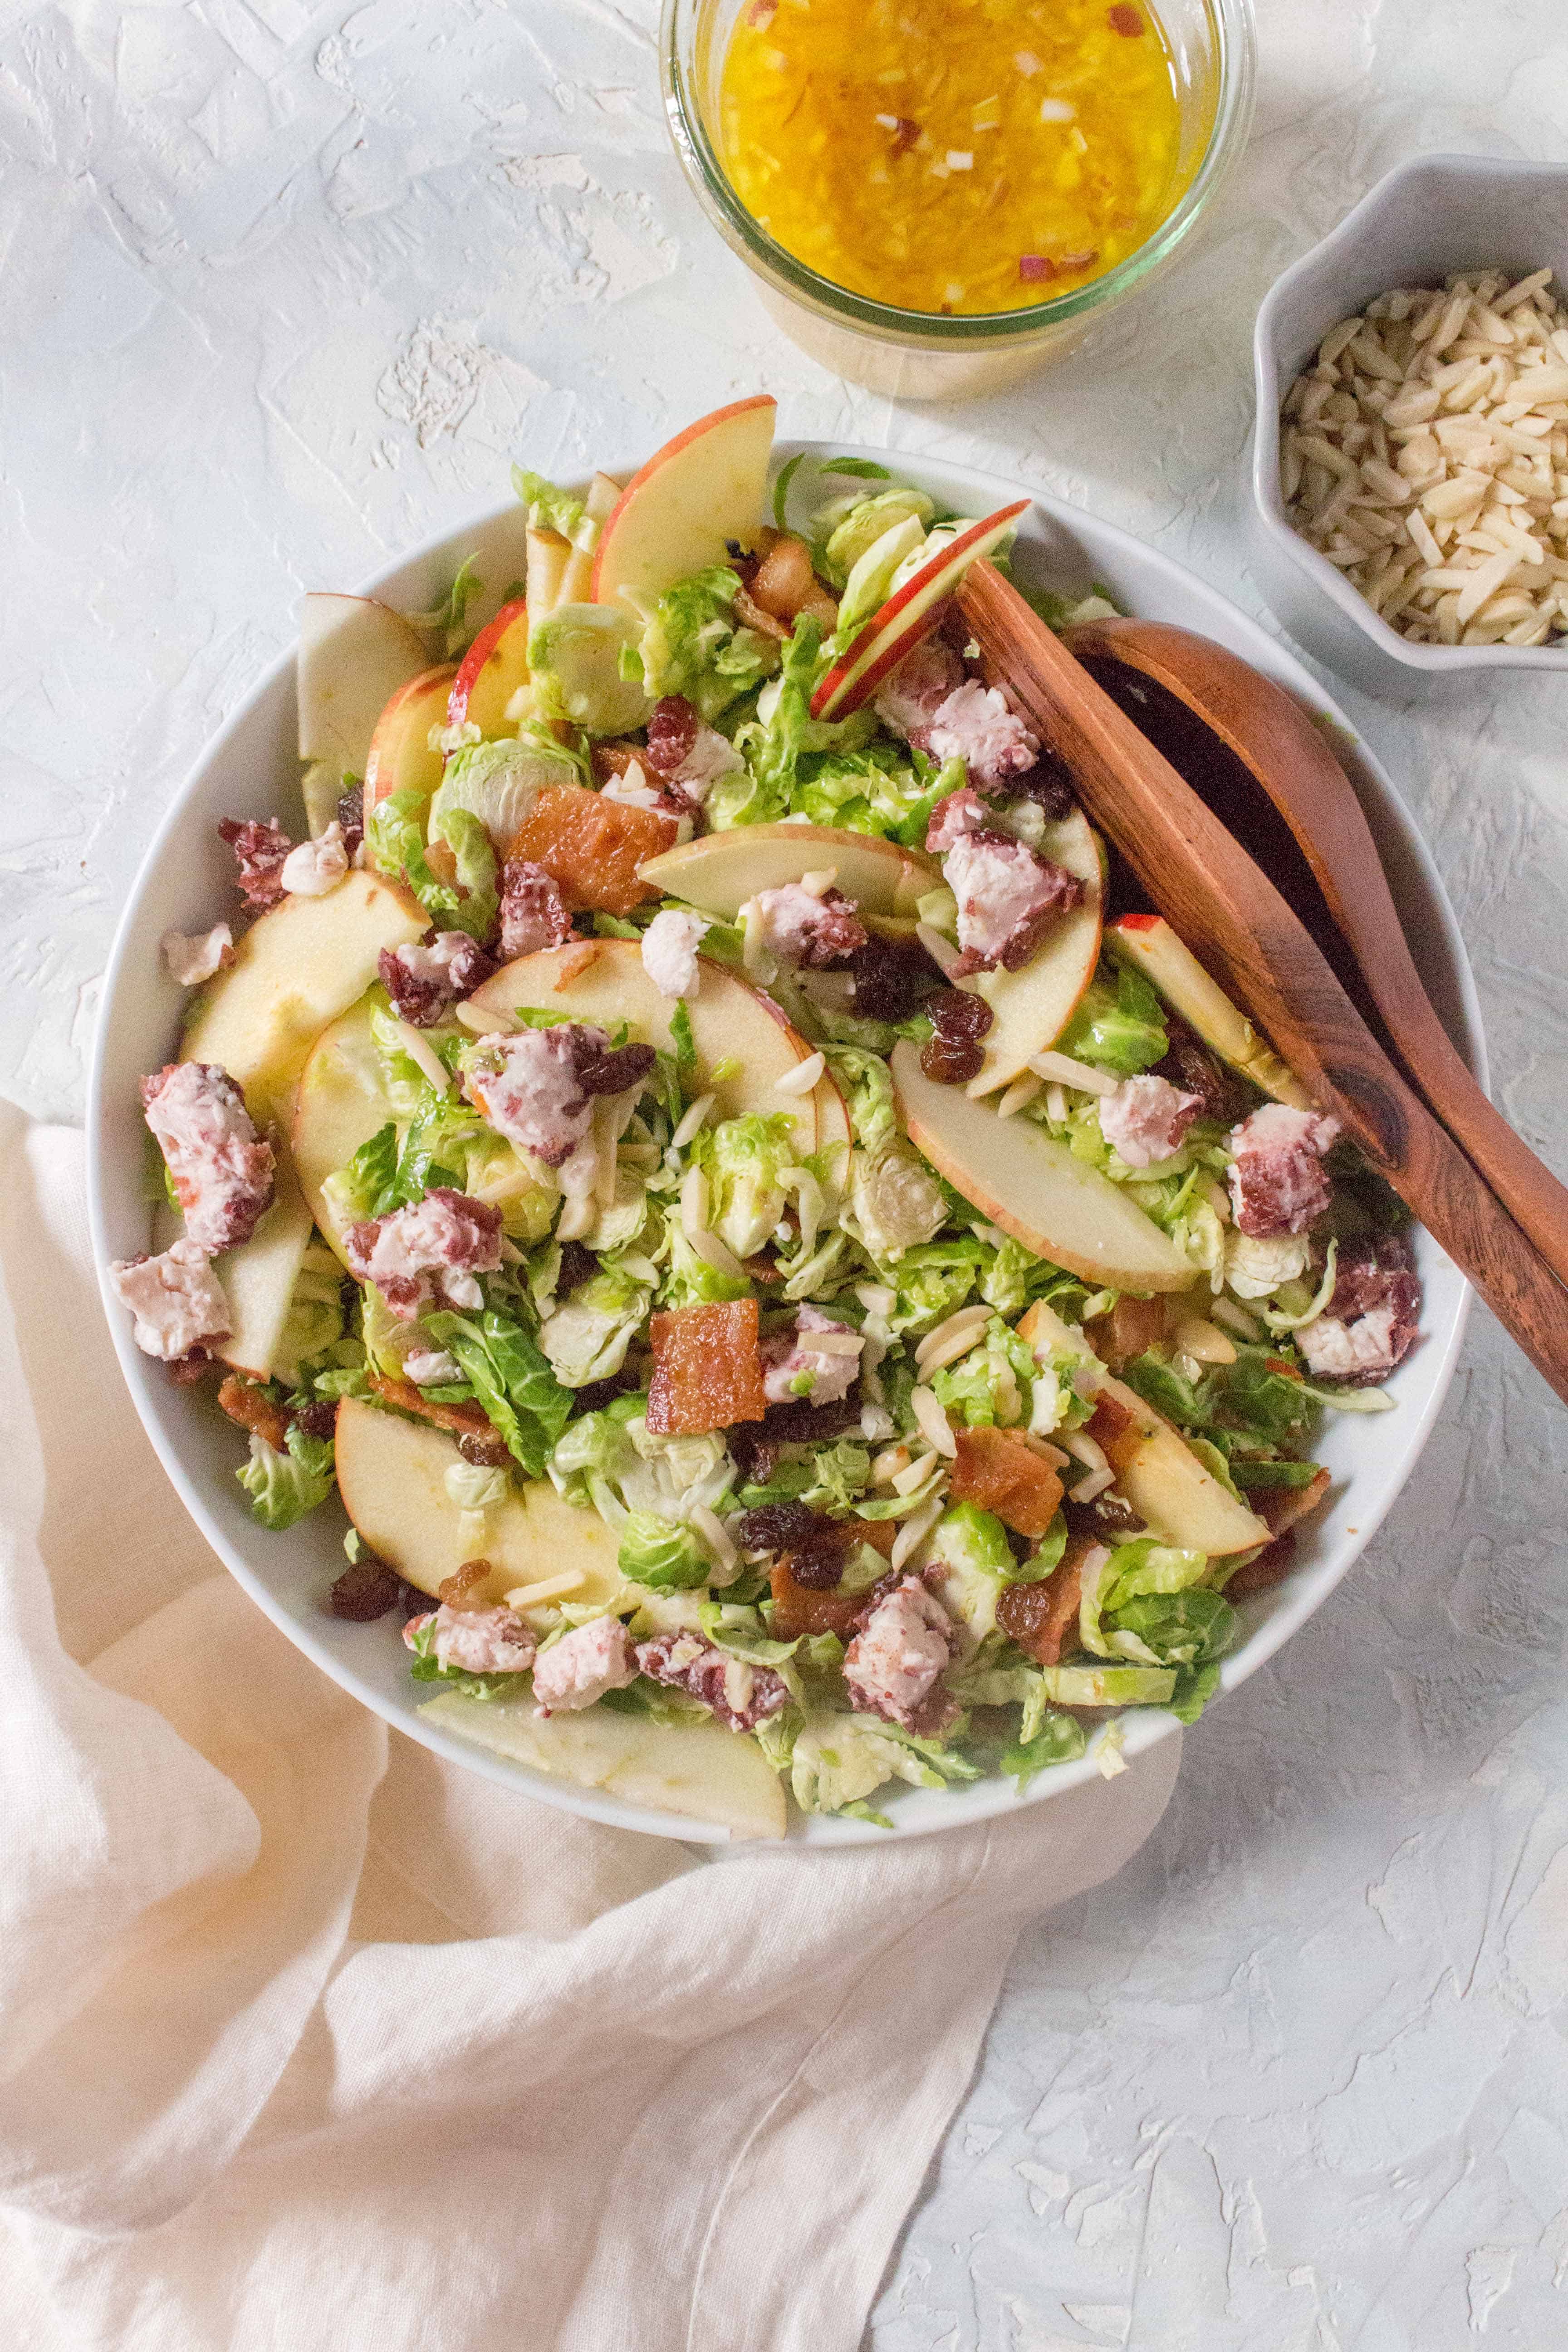 How To Make This Brussels Sprouts Salad